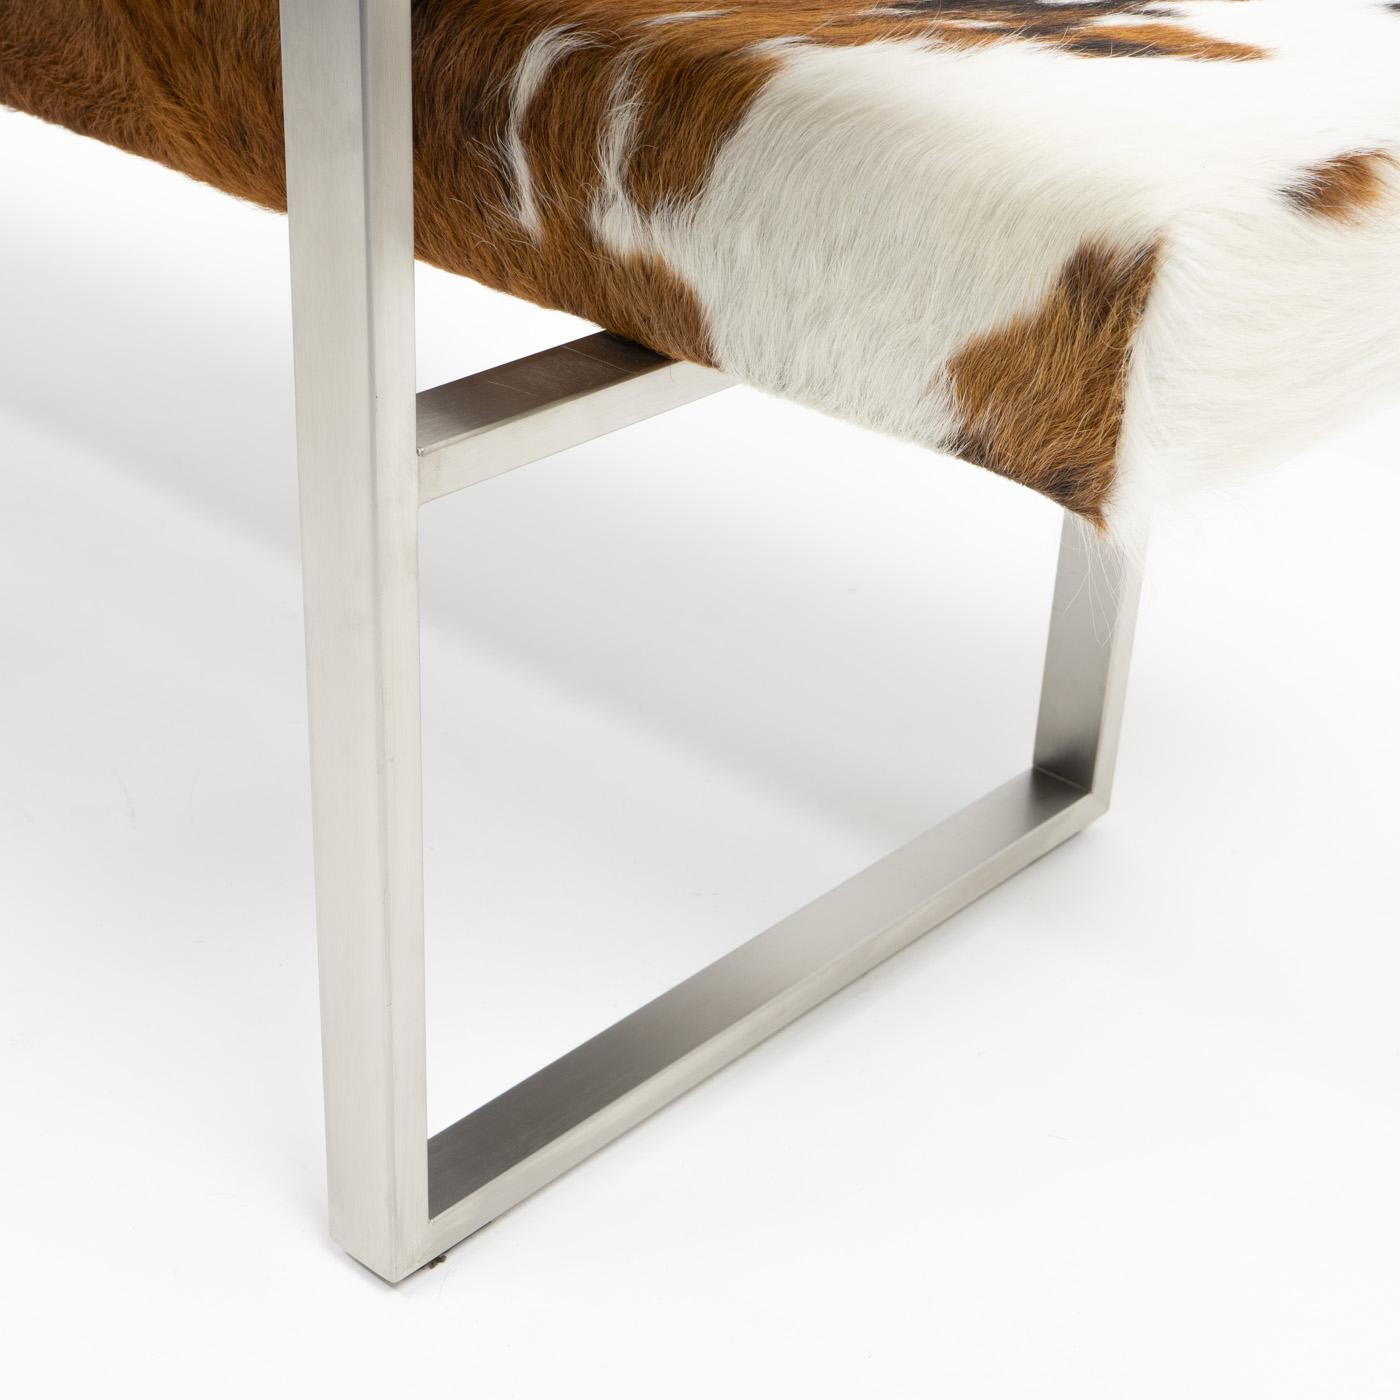 Swiss Design Permesso Bench in cowhide, by Girsberger - 2000s For Sale 5